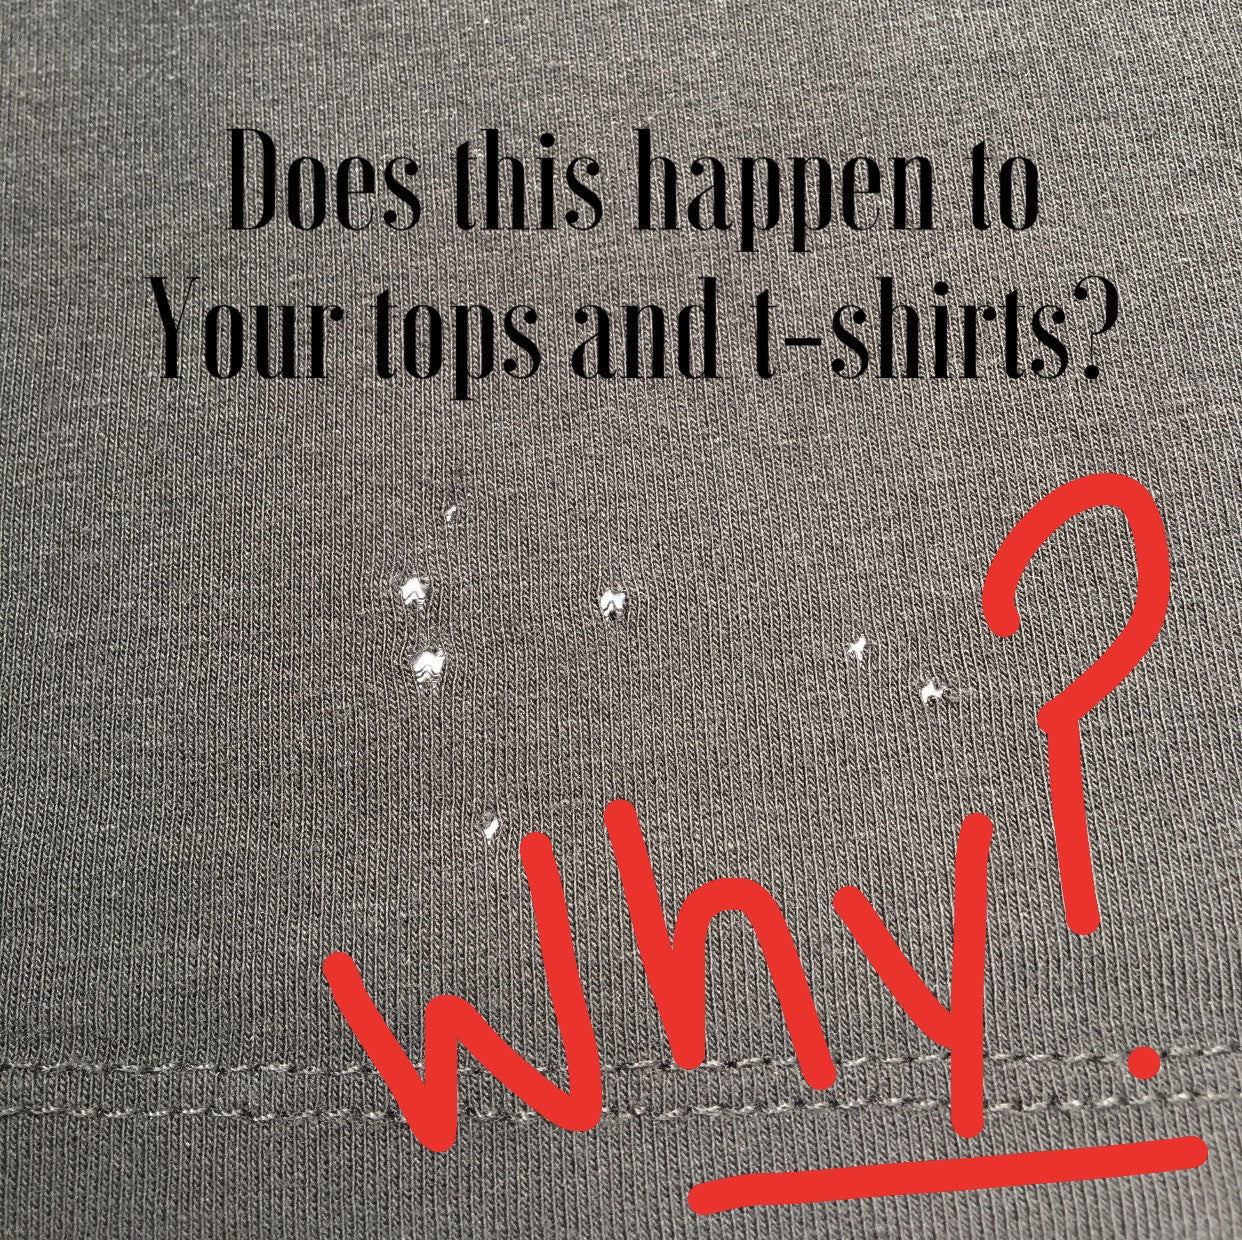 Mysterious Tiny Holes in your T-shirts - What Actually Causes Them